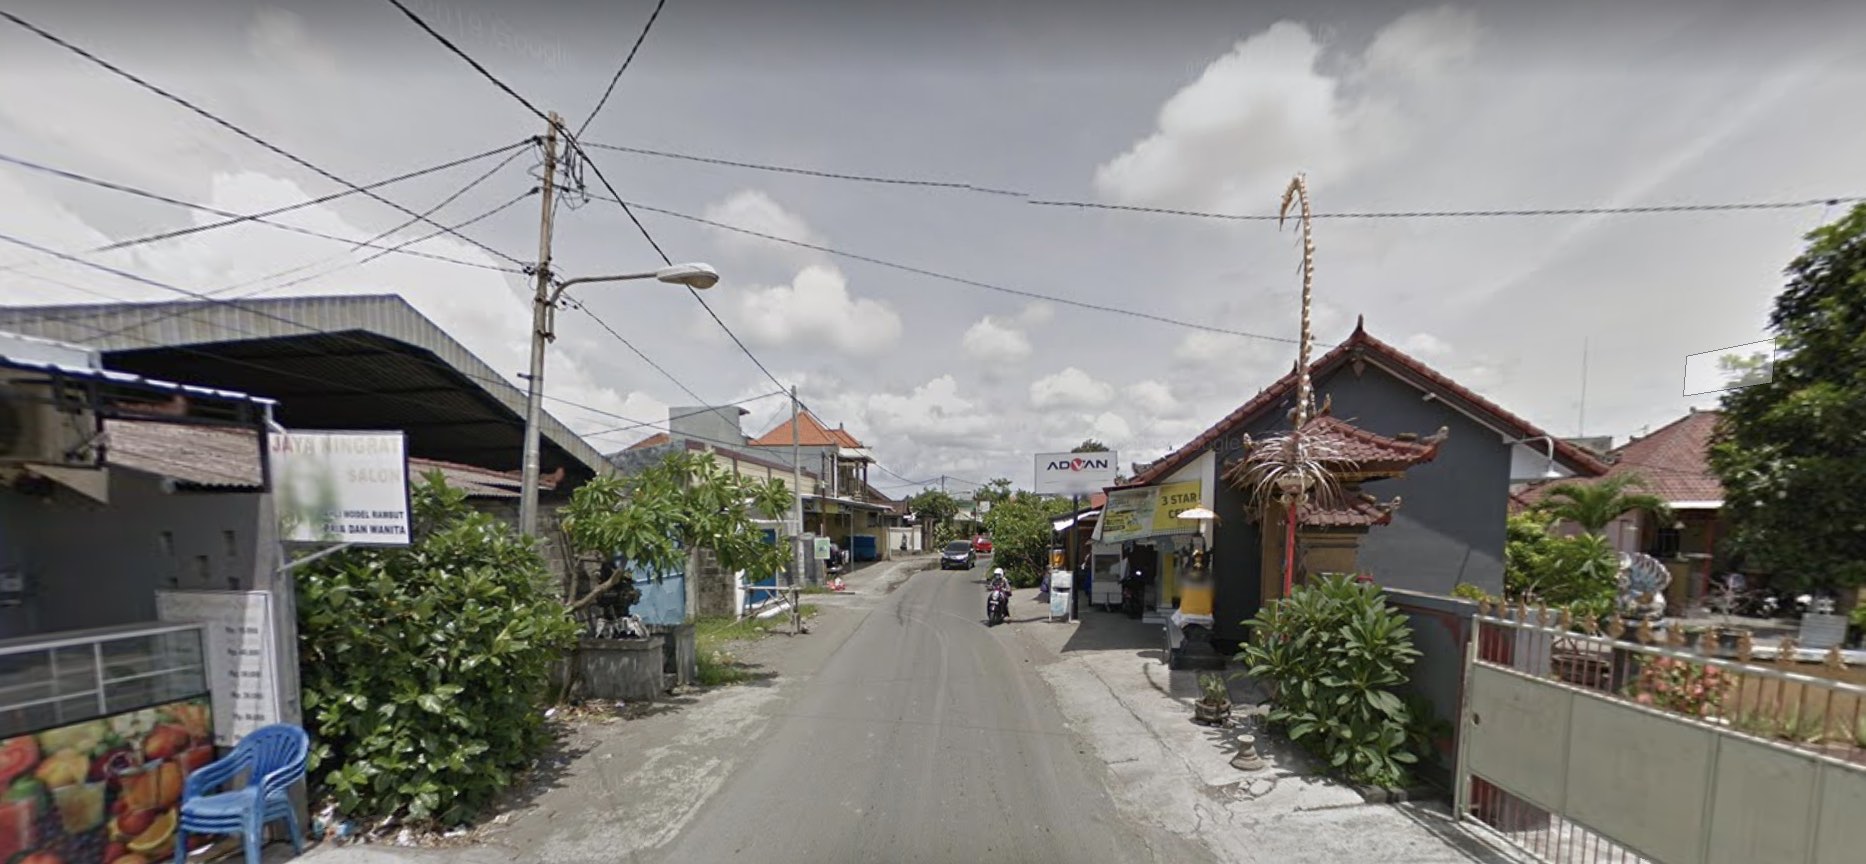 The incident reportedly happened in Jl. Kresek, south Denpasar yesterday evening. Photo: Google Maps